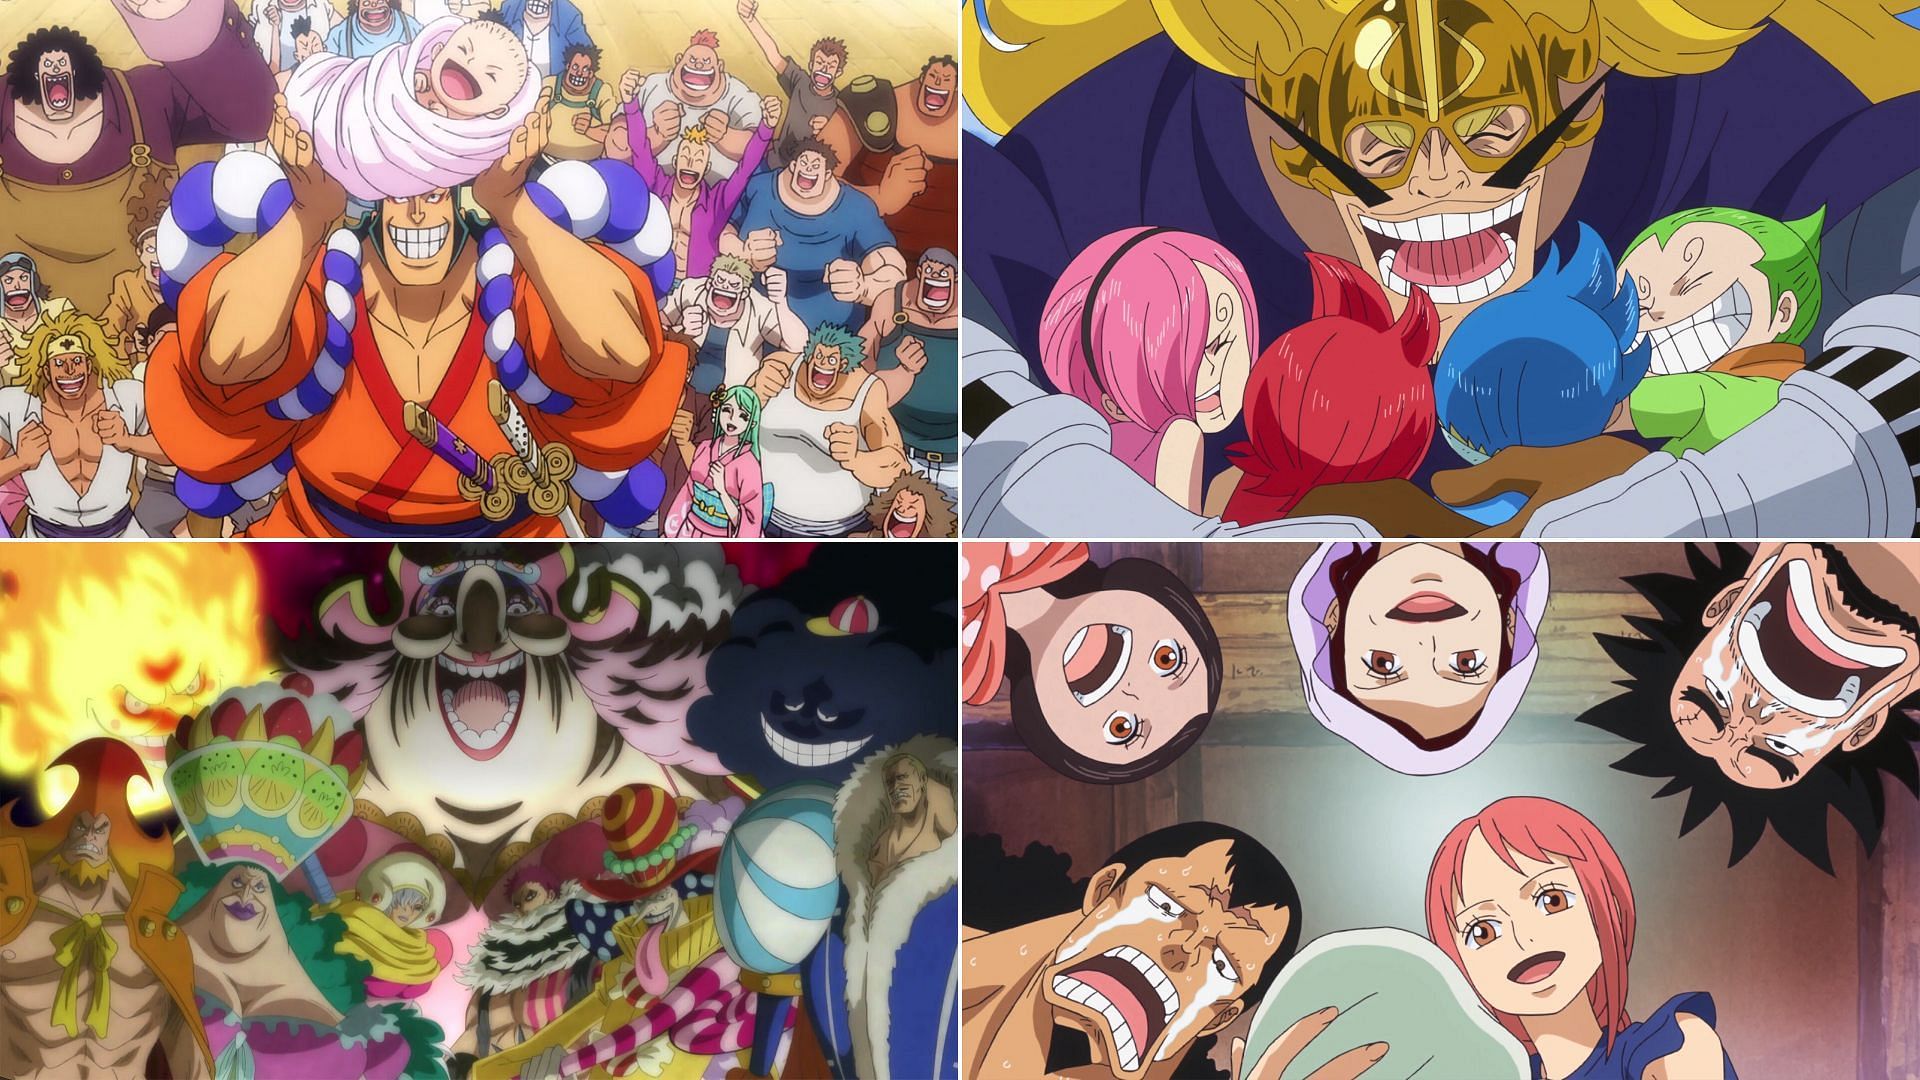 23 Strongest Rokushiki Users in One Piece World, Ranked 